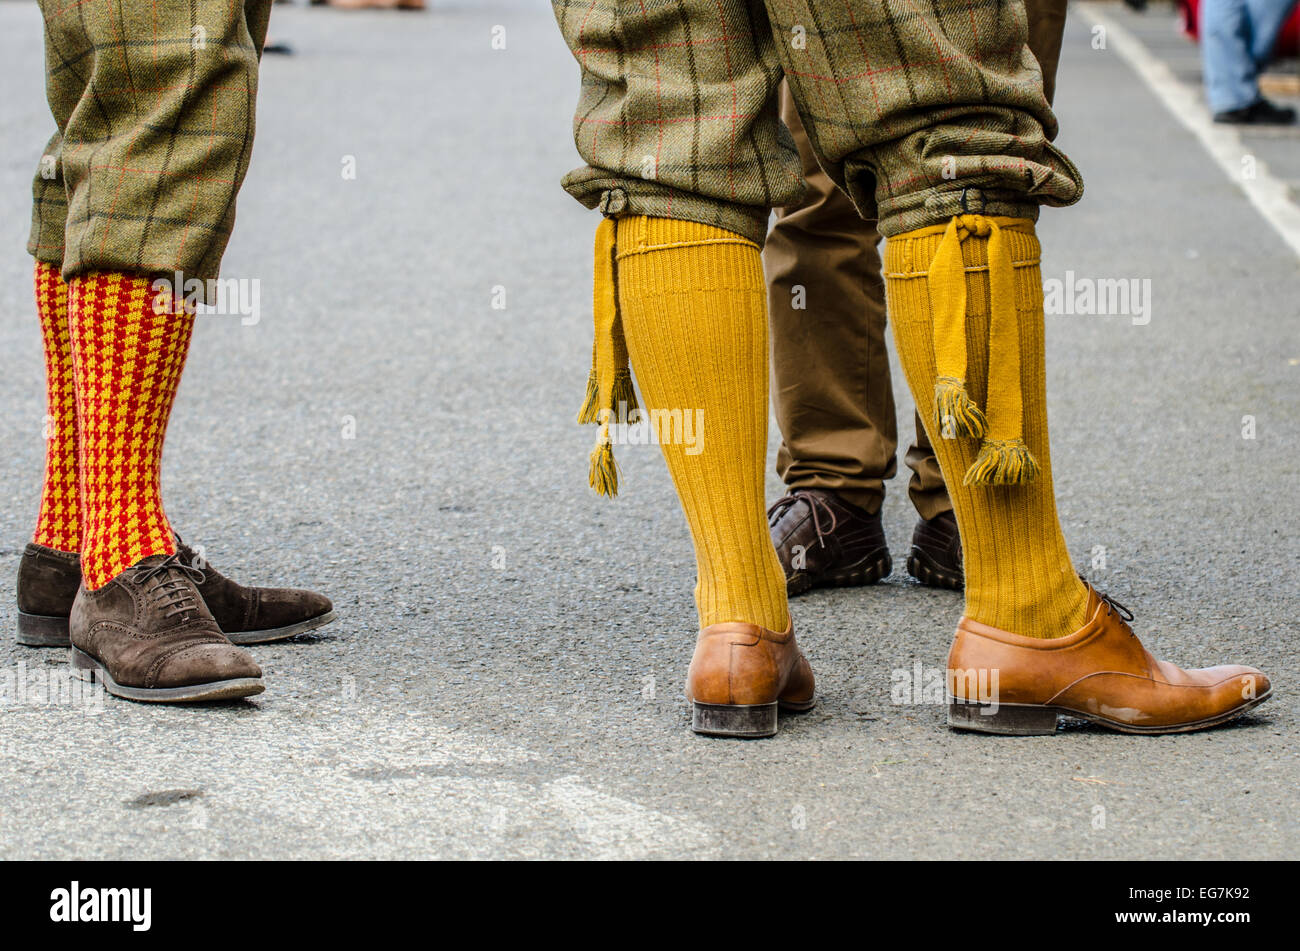 Plus-fours are breeches or trousers that extend 4 inches (10 cm) below the knee, with knee high socks. Vintage classic period attire Goodwood Revival Stock Photo